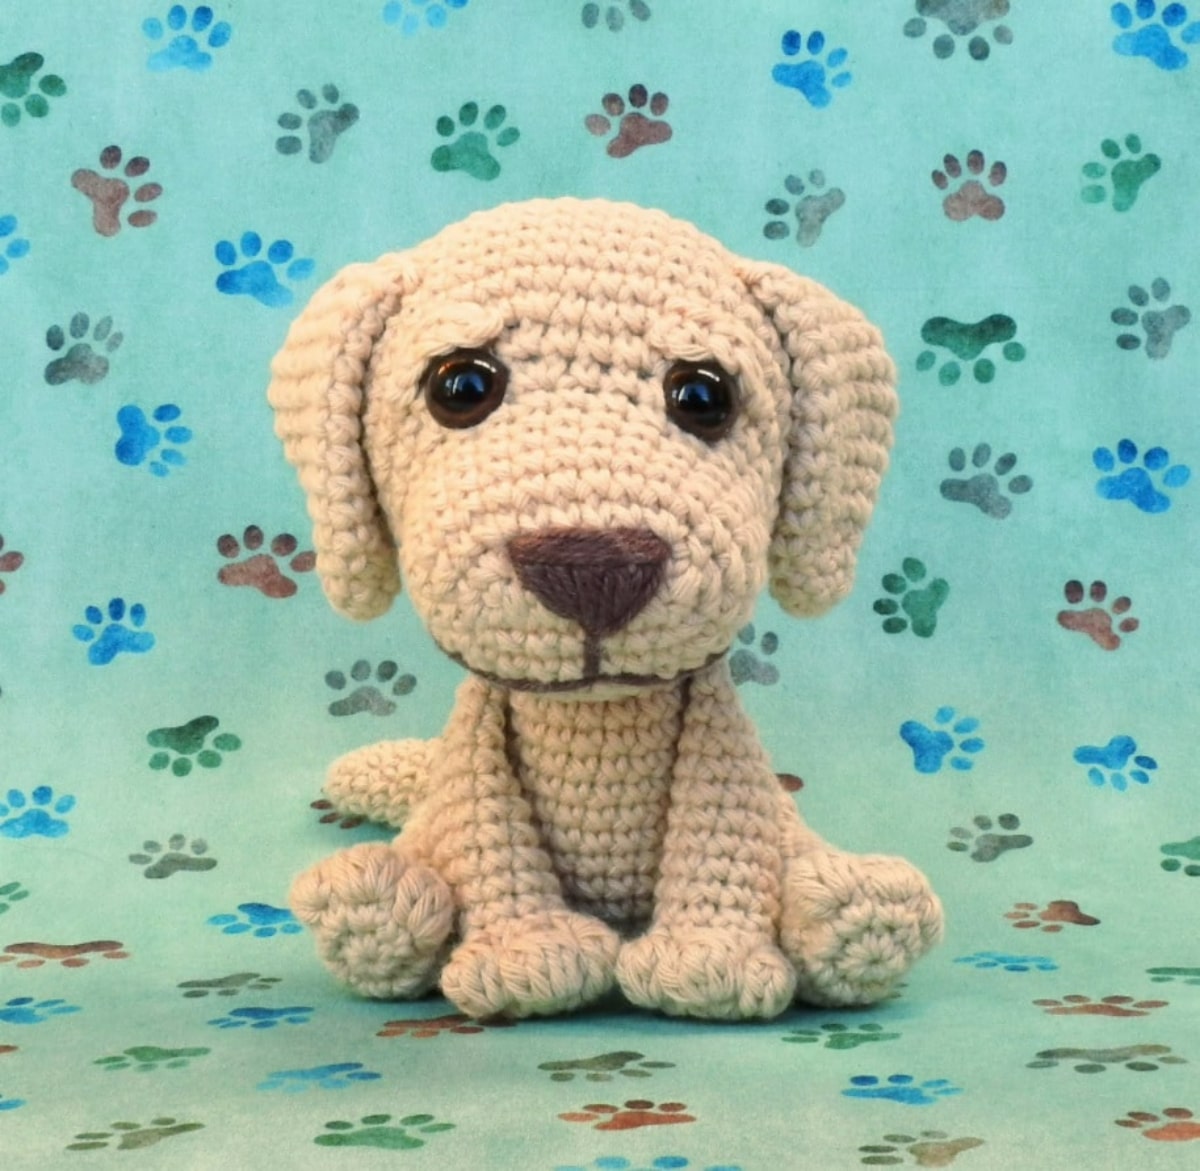 Small crochet stuffed Labrador with an oversized head, and large orange nose sitting on a green background covered in paw prints.